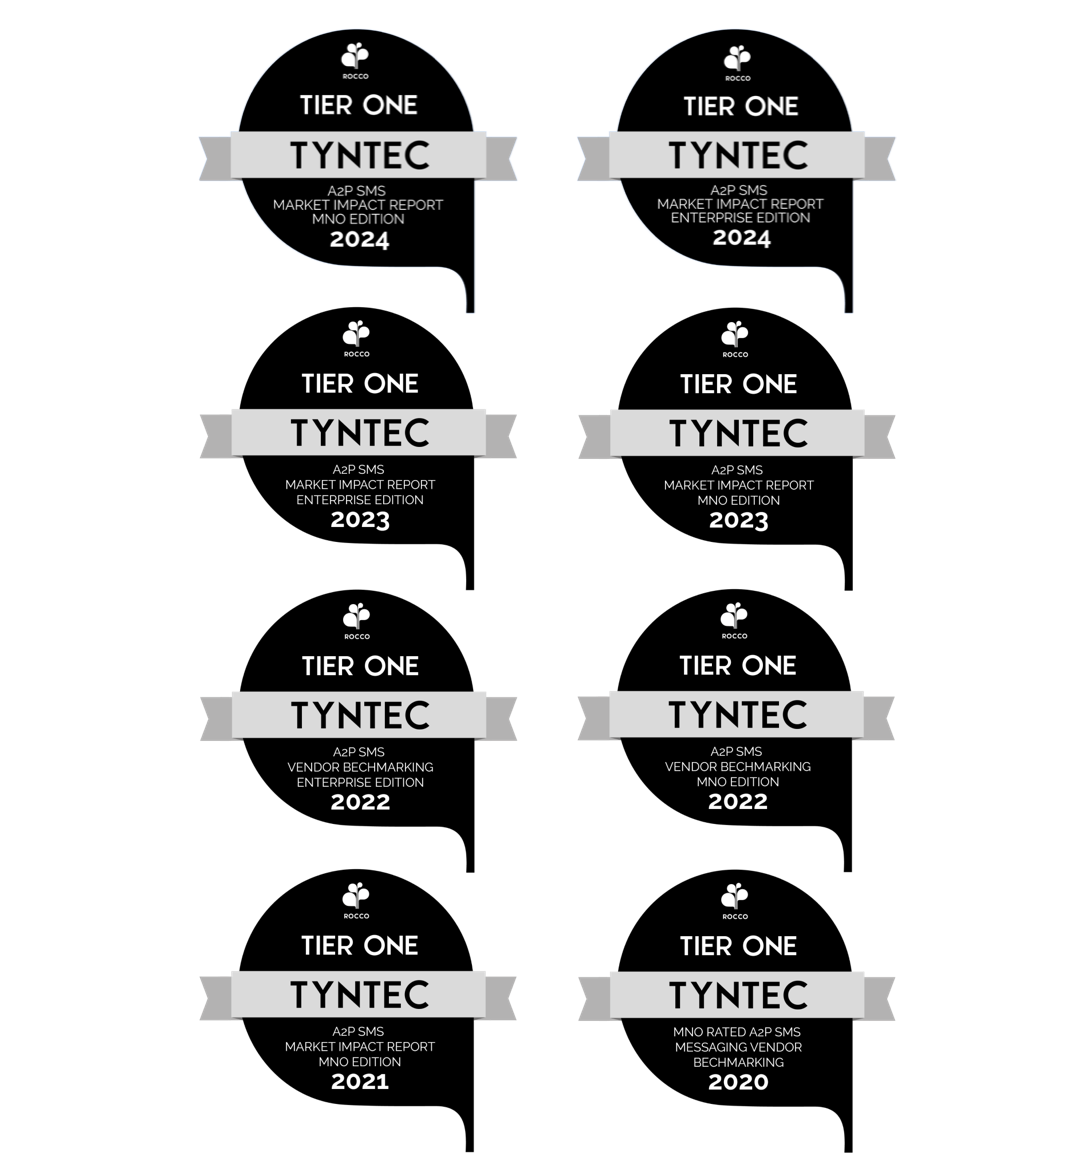         Image showing multiple "Tier One" badges awarded to tyntec for A2P SMS Market Impact Report, Messaging Vendor, and more for years 2023 and 2024 by ROCCO, highlighting their excellence in A2P monetization.